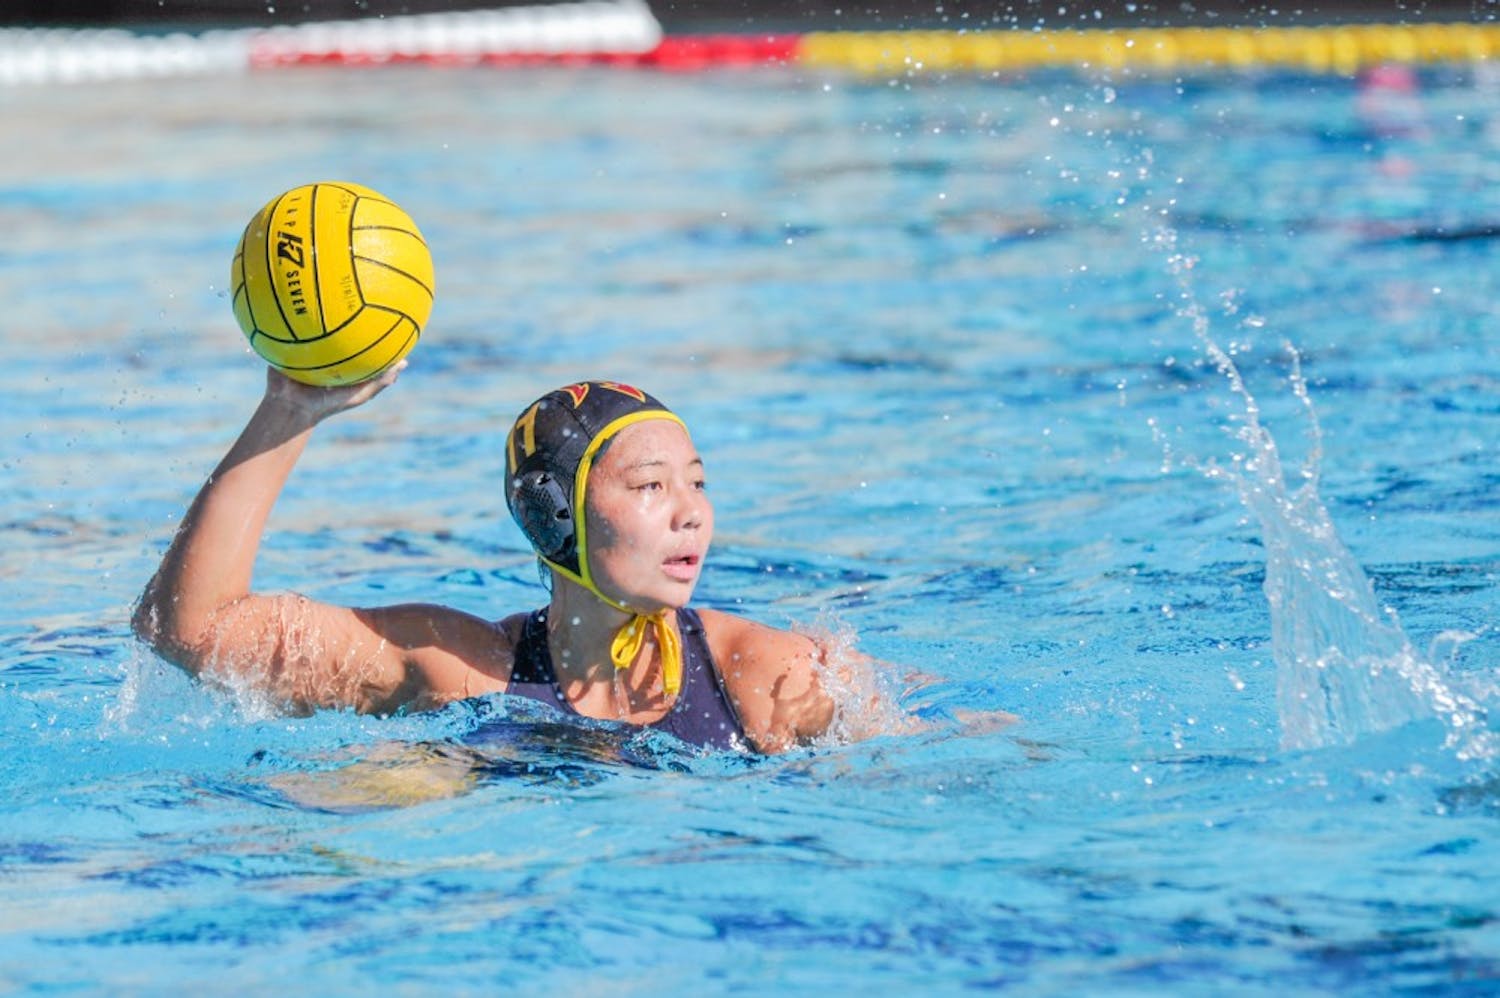 Senior Ao Gao looks for the pass&nbsp;against the University of Pacific on Sunday, March 20, 2016 at the Mona Plummer Aquatic Complex in Tempe, AZ. ASU water polo won 5-3.